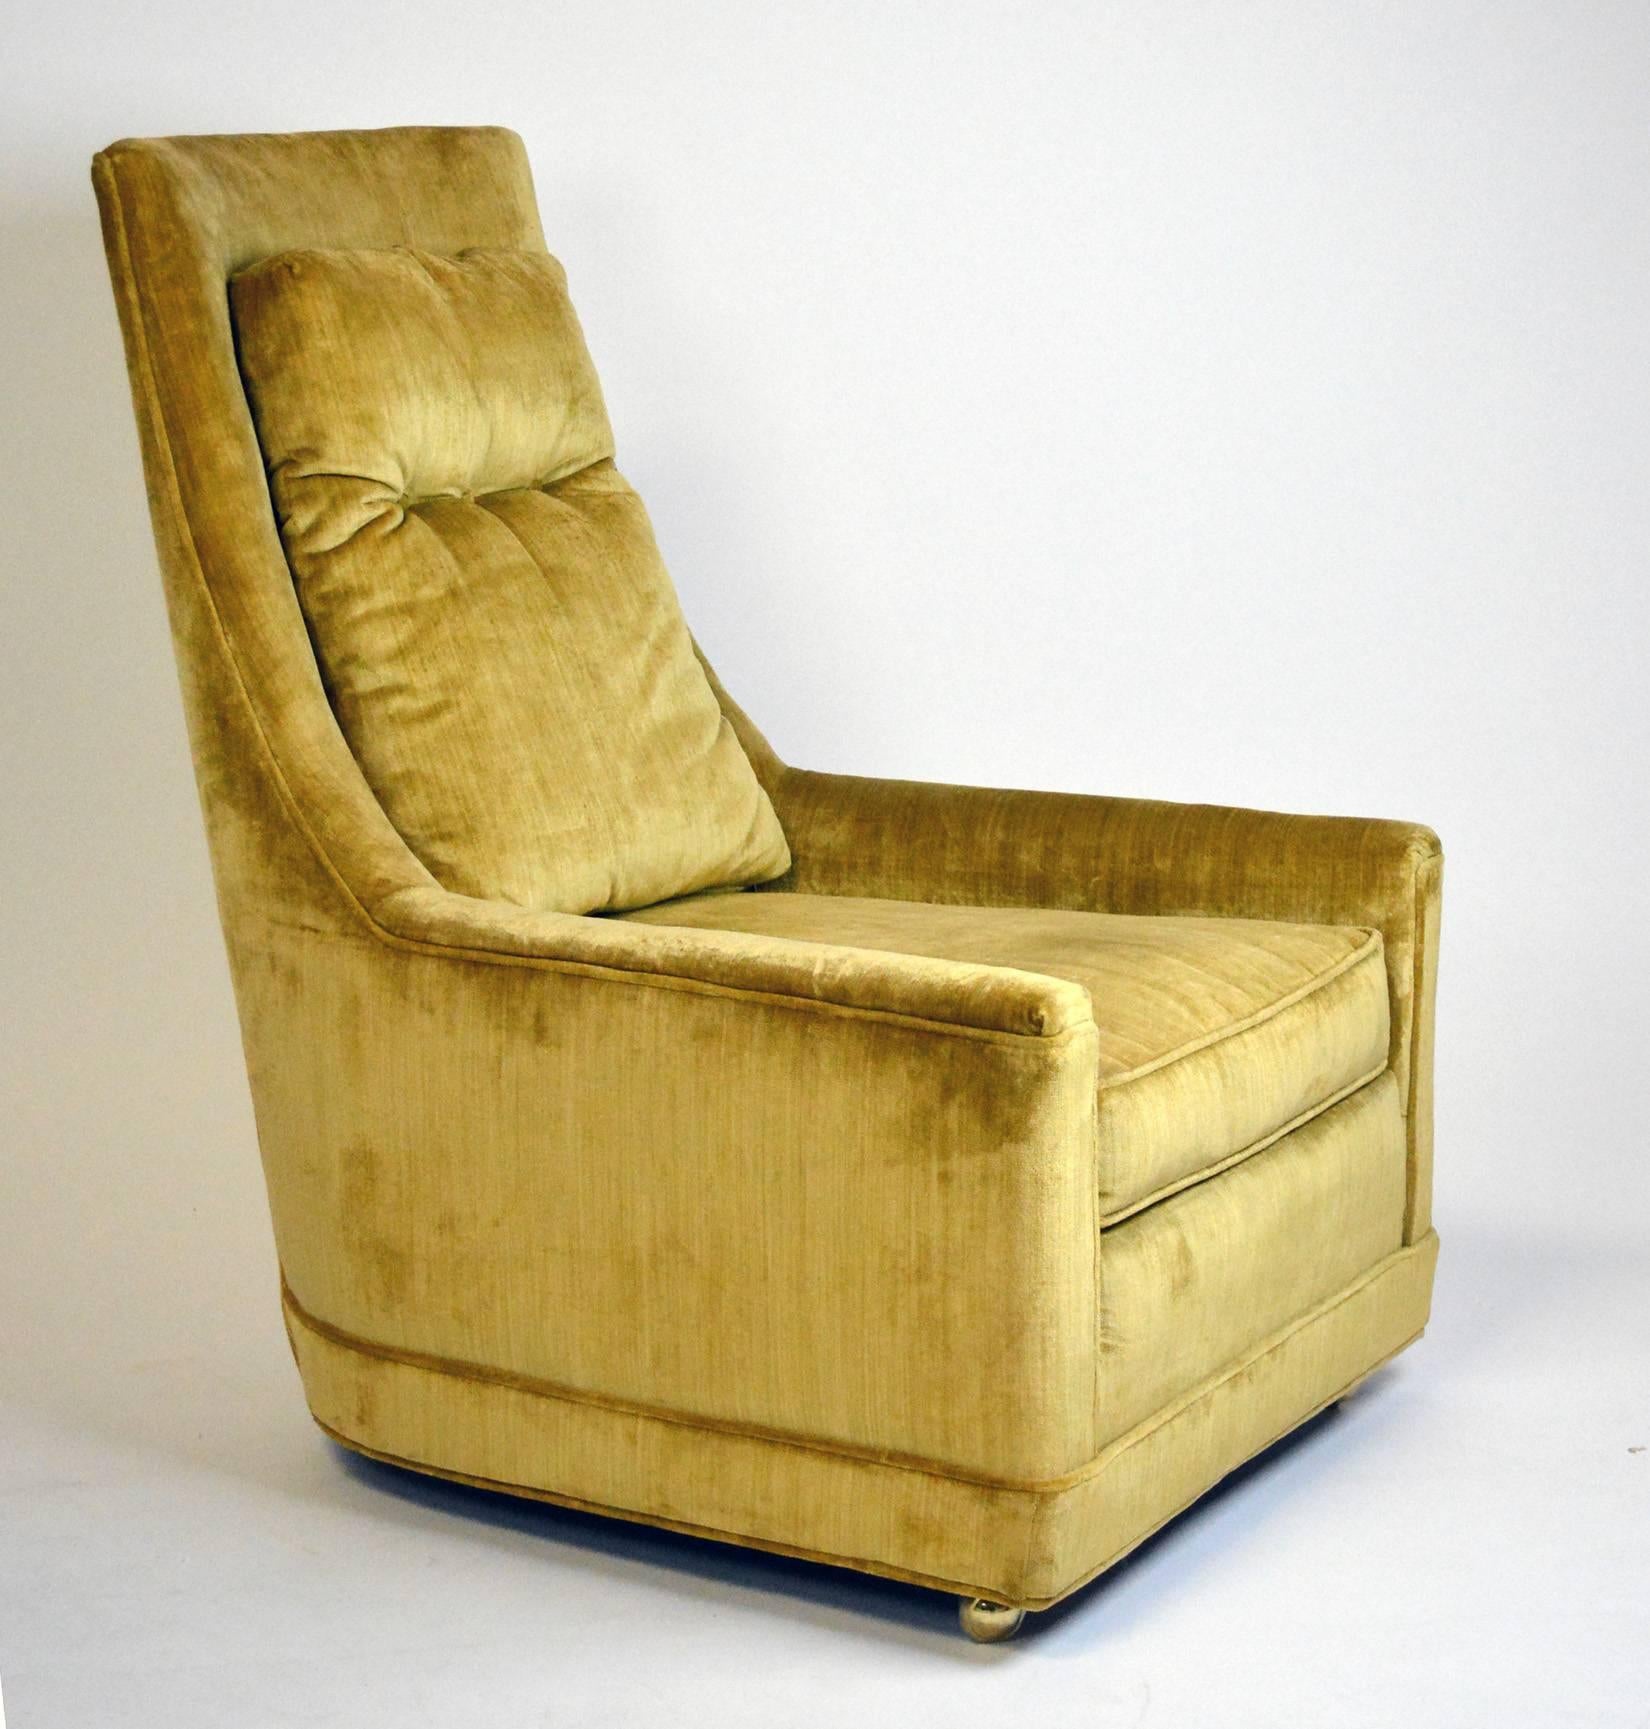 A pair of 1970s glam Hollywood Regency high back lounge chairs in original velvet upholstery. The low arm swoops up to a high back with a loose back cushion, tufted with three buttons. The chairs are on casters at the front and legs at the back.